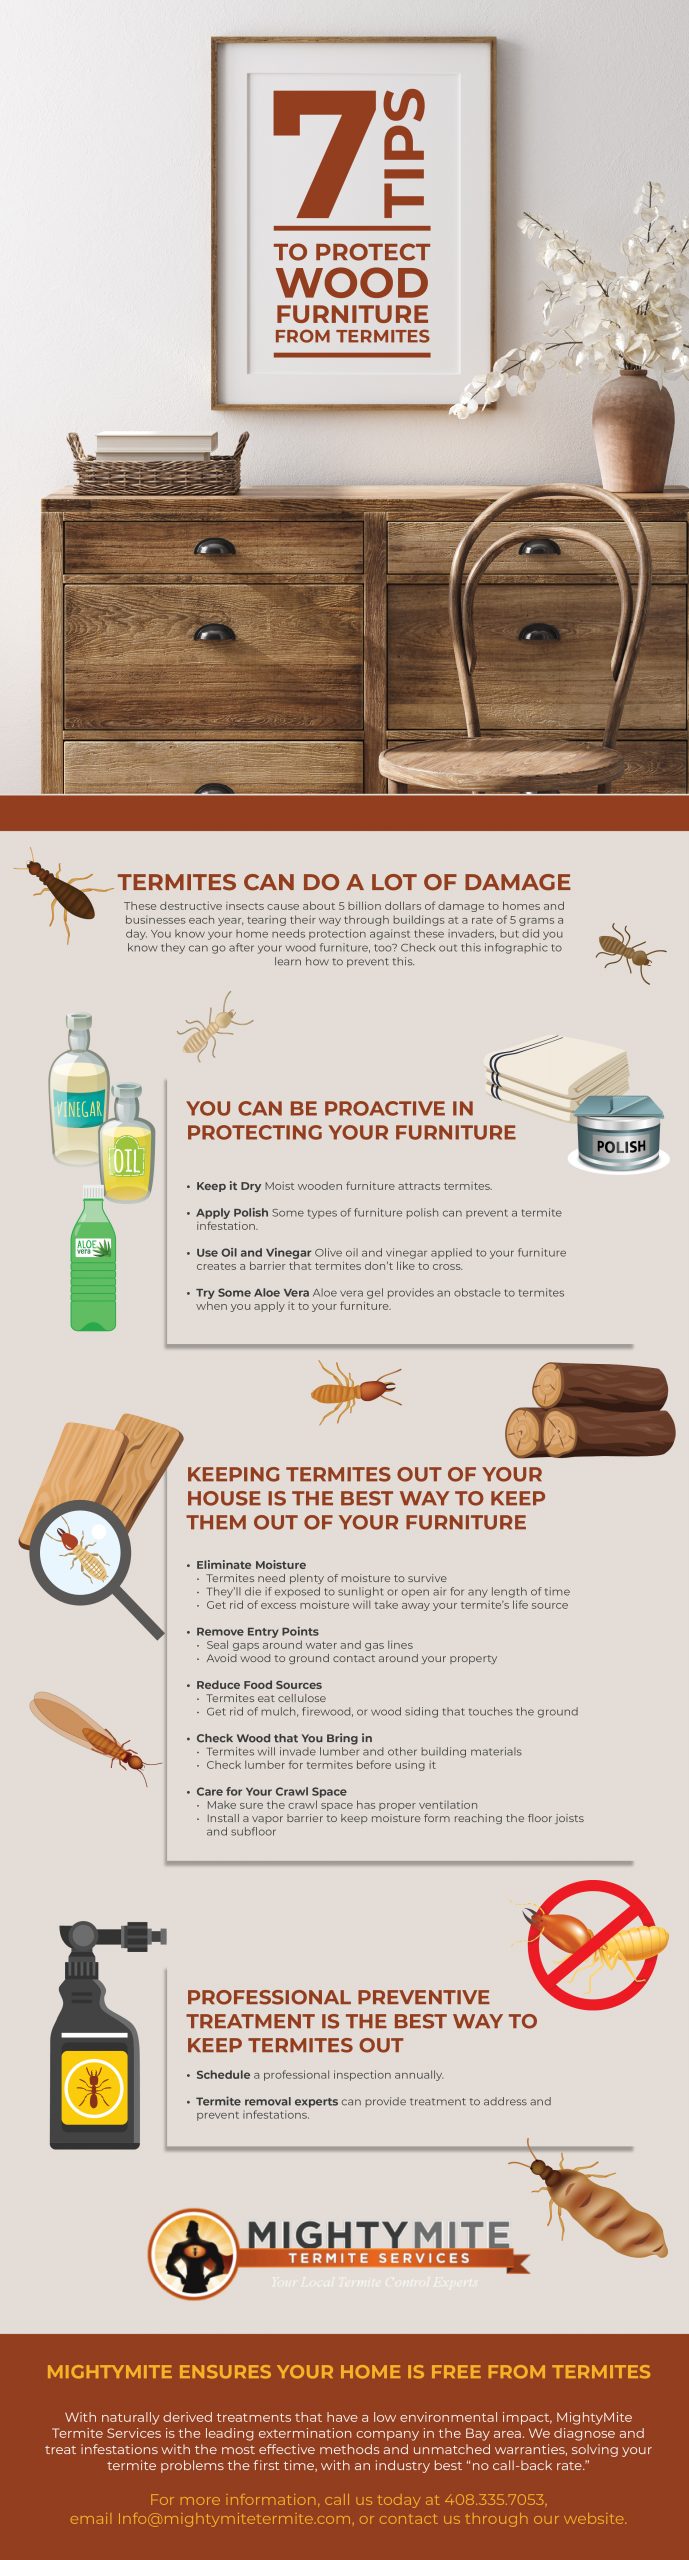 How to Protect Wood from Termites